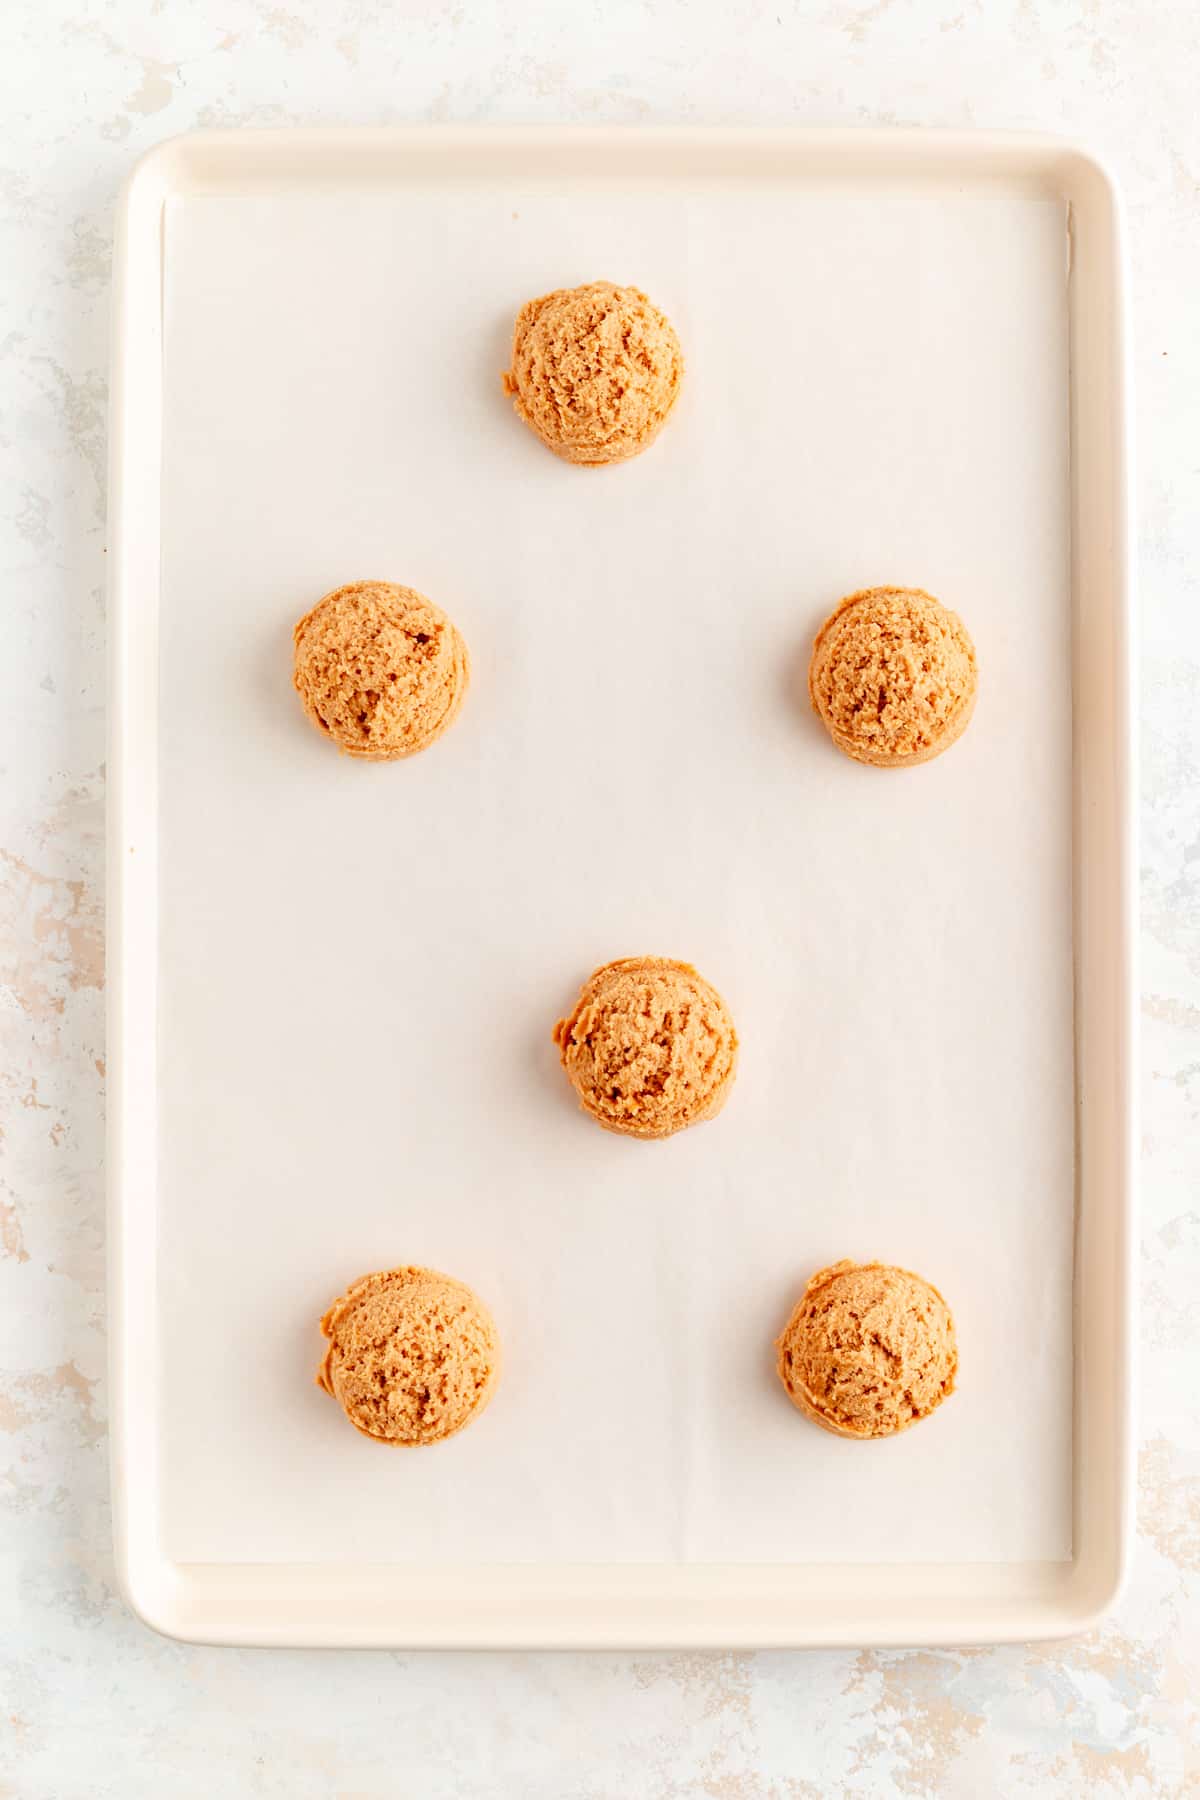 six plain peanut butter cookie dough scoops space on a lined white baking sheet.